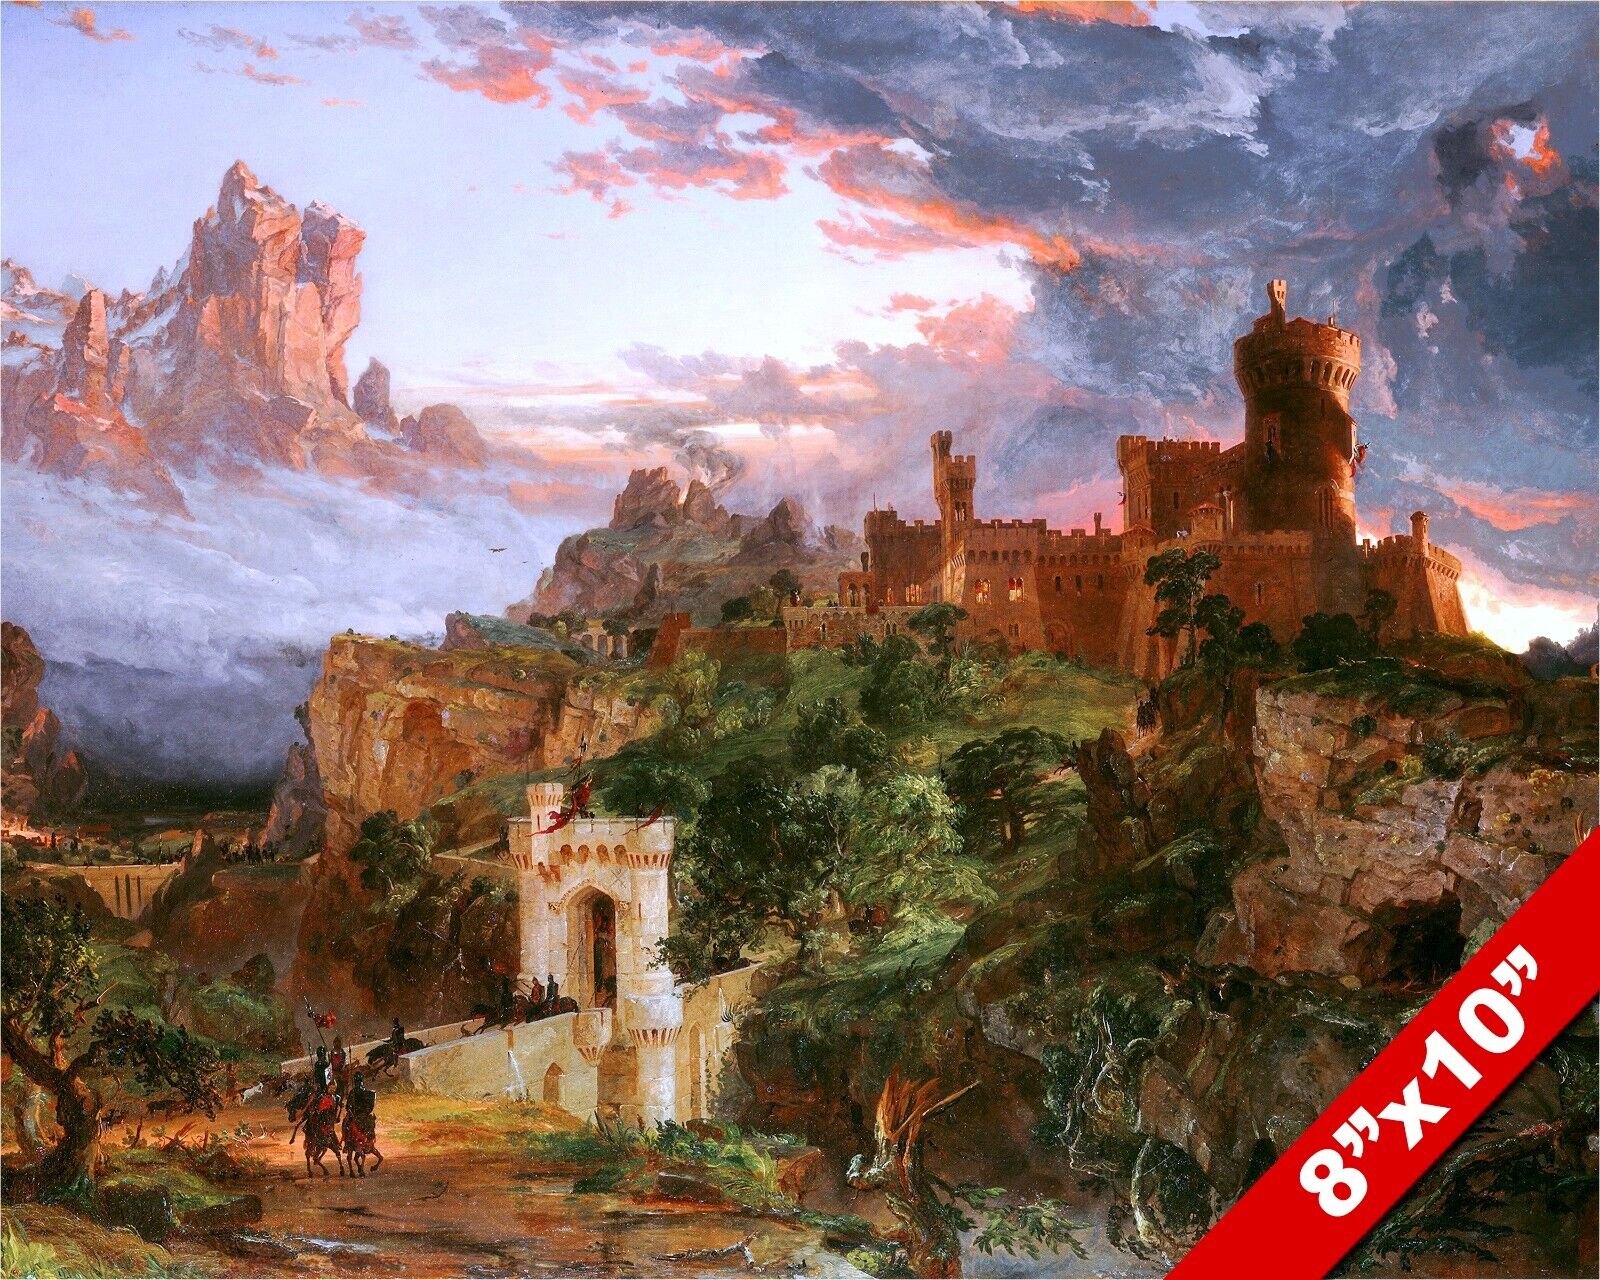 THE SPIRIT OF WAR EPIC FANTASY CASTLE PAINTING ART REAL CANVAS GICLEE PRINT